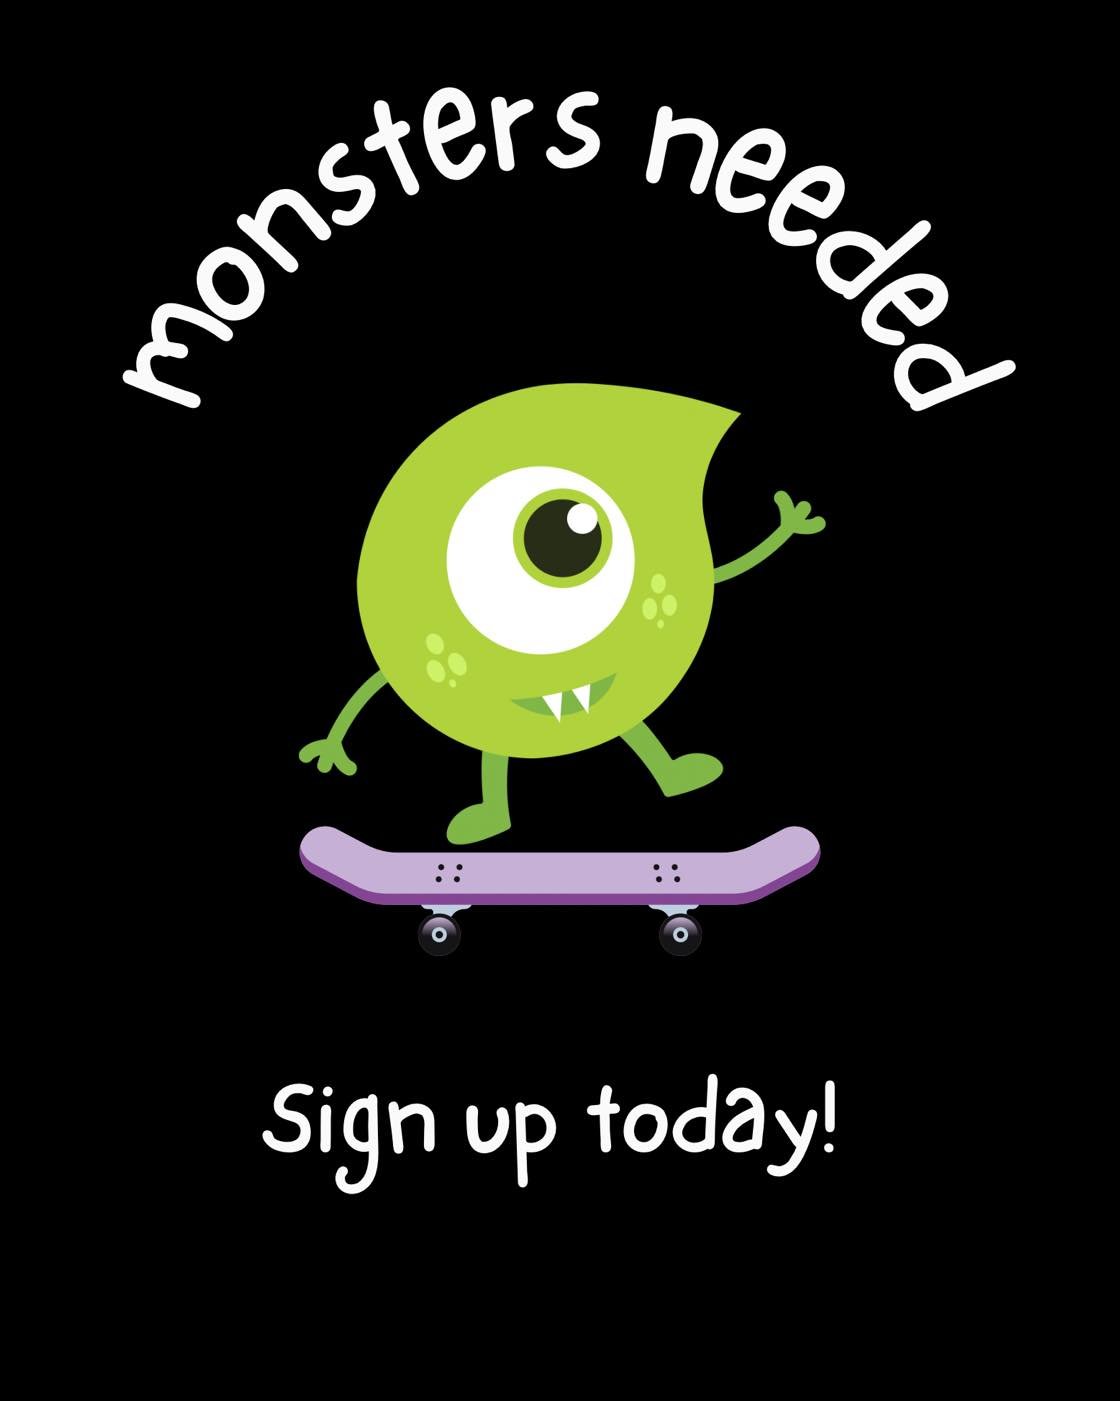 Our Monsters Inc. movie night is THIS Friday! 🎥 

🙋&zwj;♀️We are in need of volunteers to help, and there are 2 different shifts available. 
This allows you to volunteer &amp; enjoy the fun! 🤩 

Shift 1 from 6:00-7:00 pm 
Shift 2 from 8:00-9:30 pm